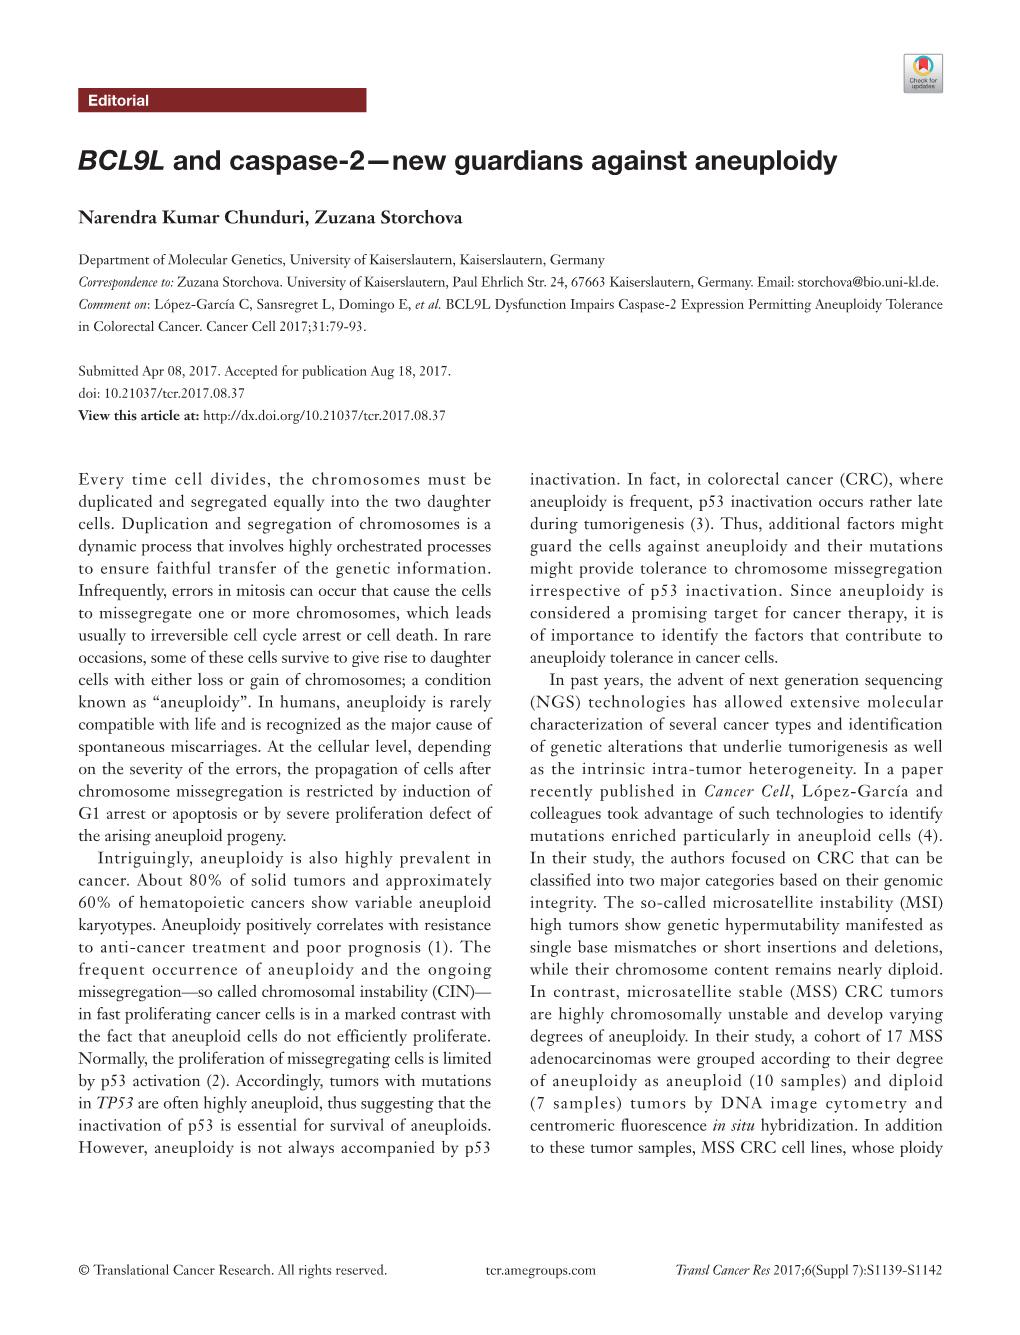 BCL9L and Caspase-2—New Guardians Against Aneuploidy